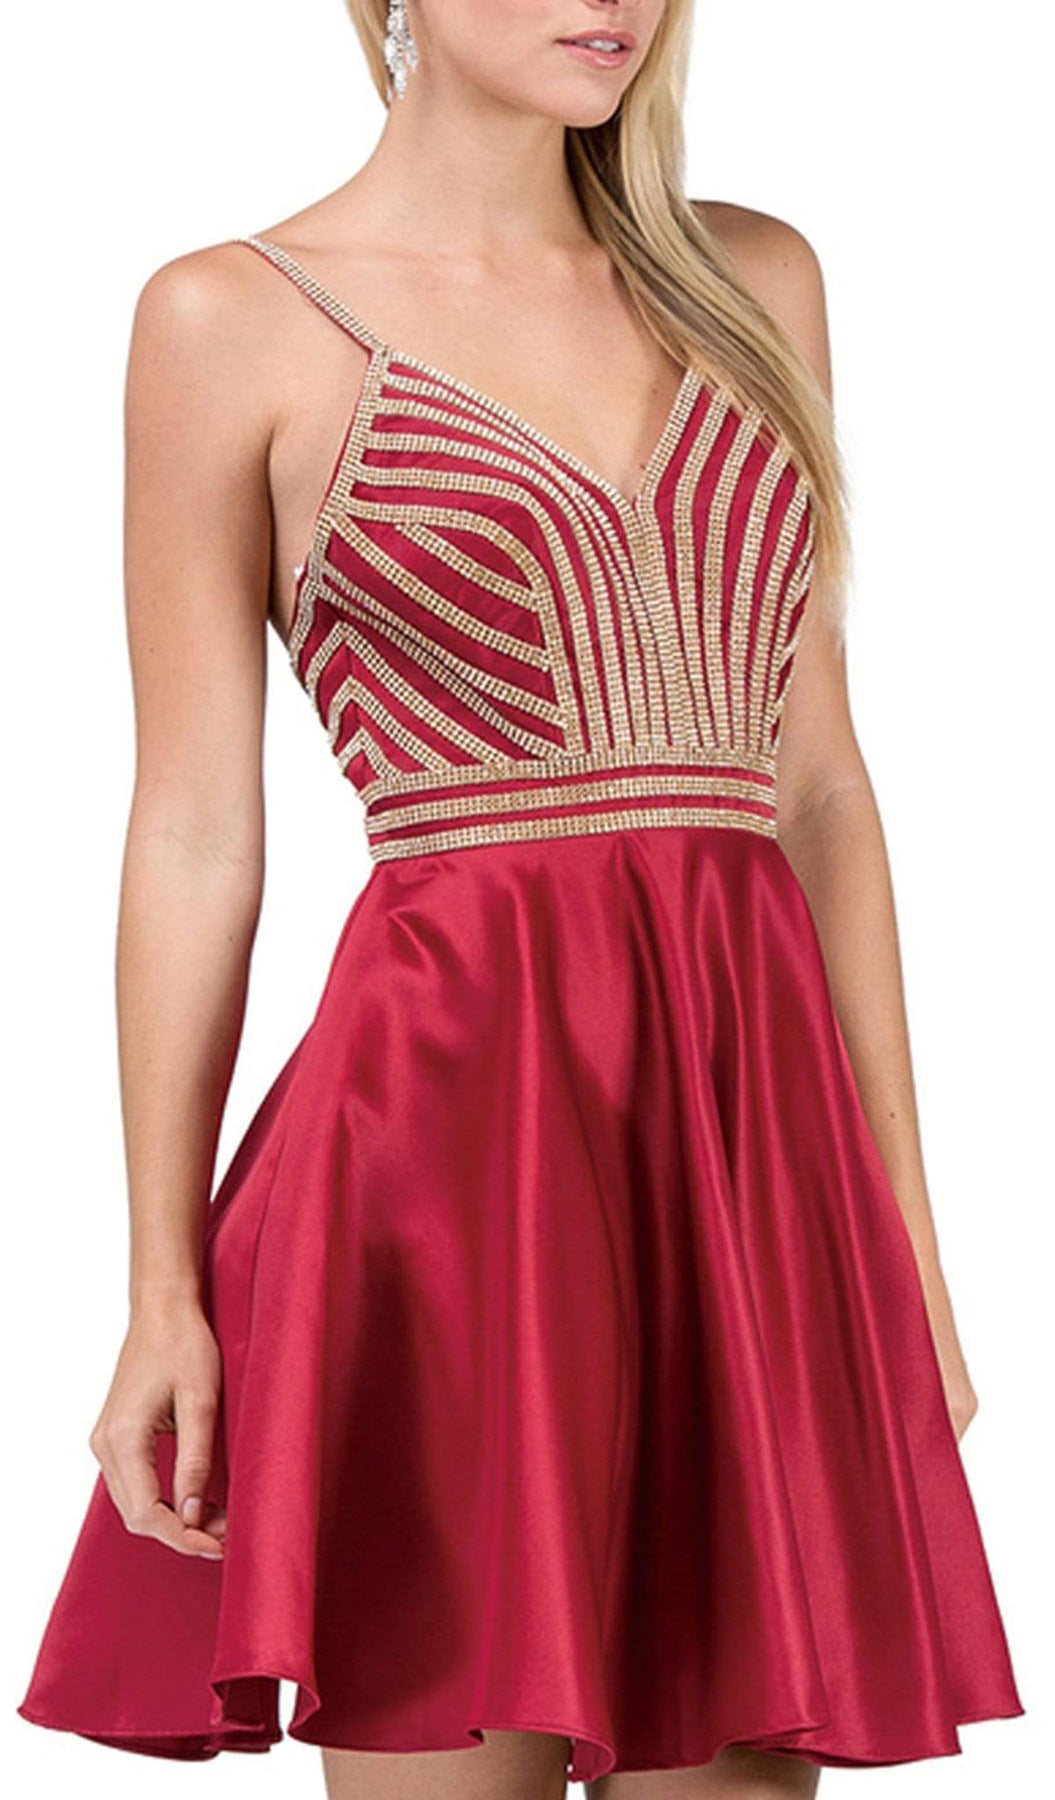 Dancing Queen - 3009 Beaded V-neck A-line Homecoming Dress Homecoming Dresses